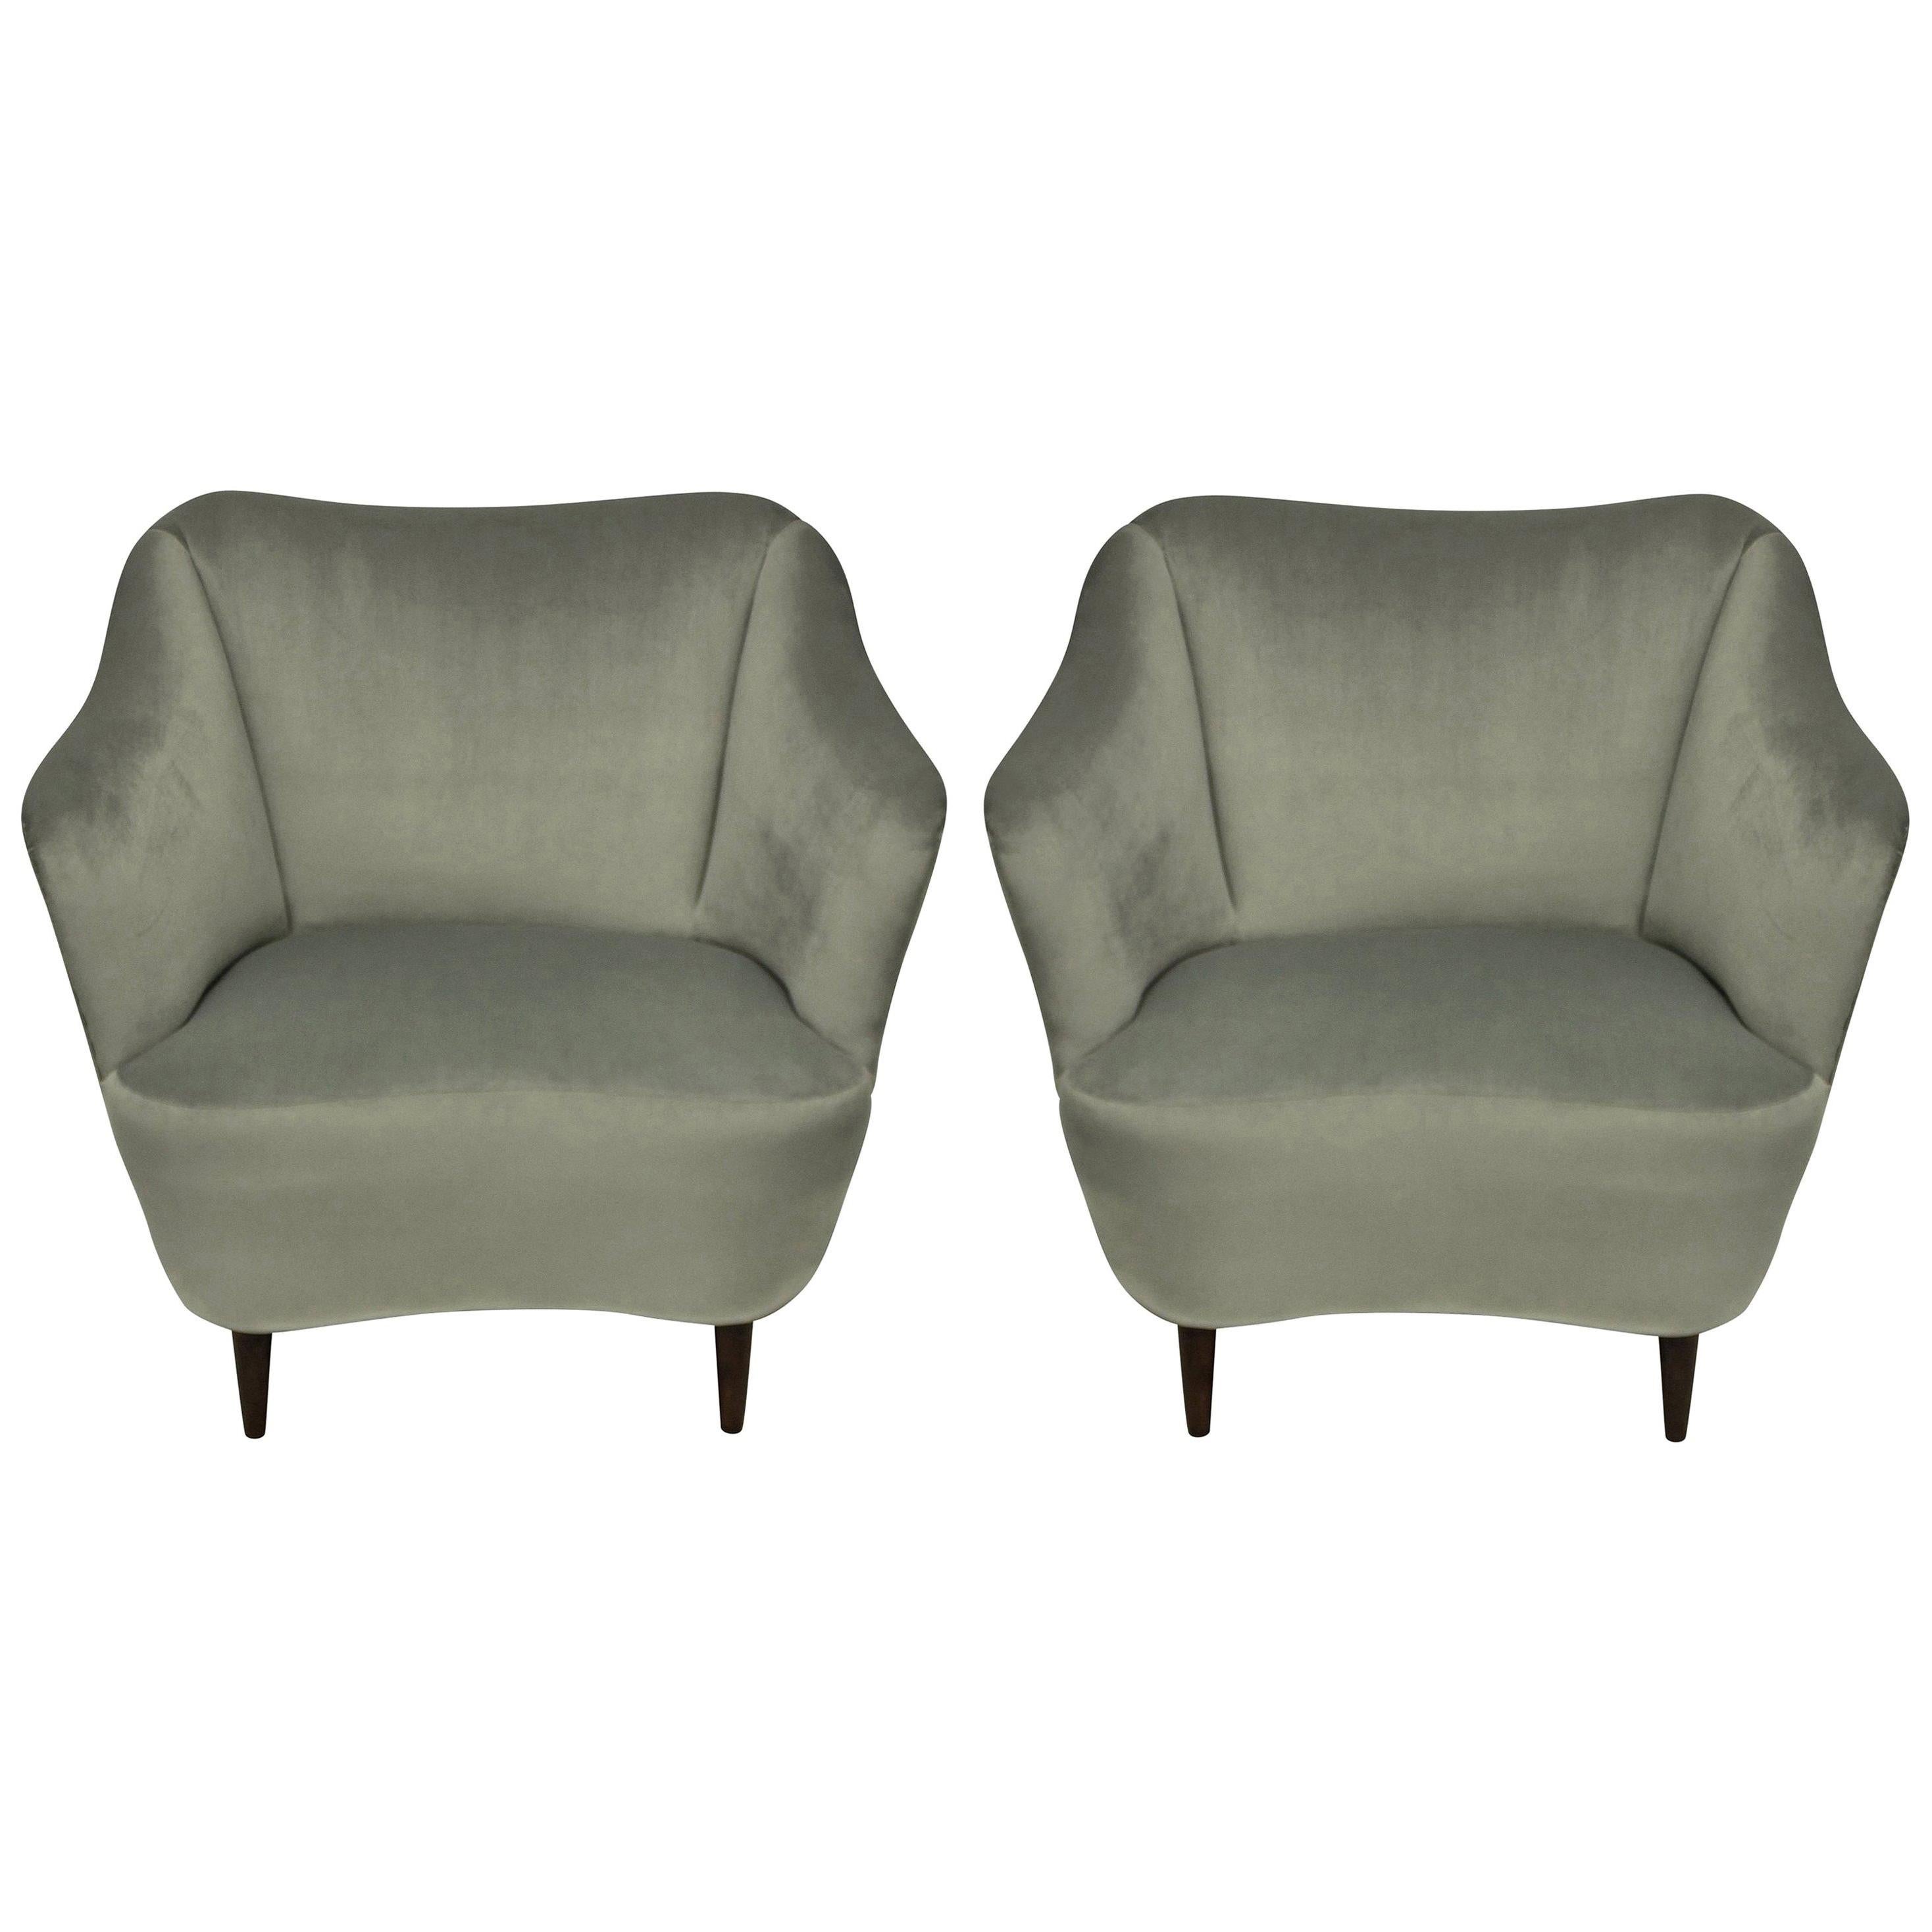 Pair of Midcentury Cocktail Chairs